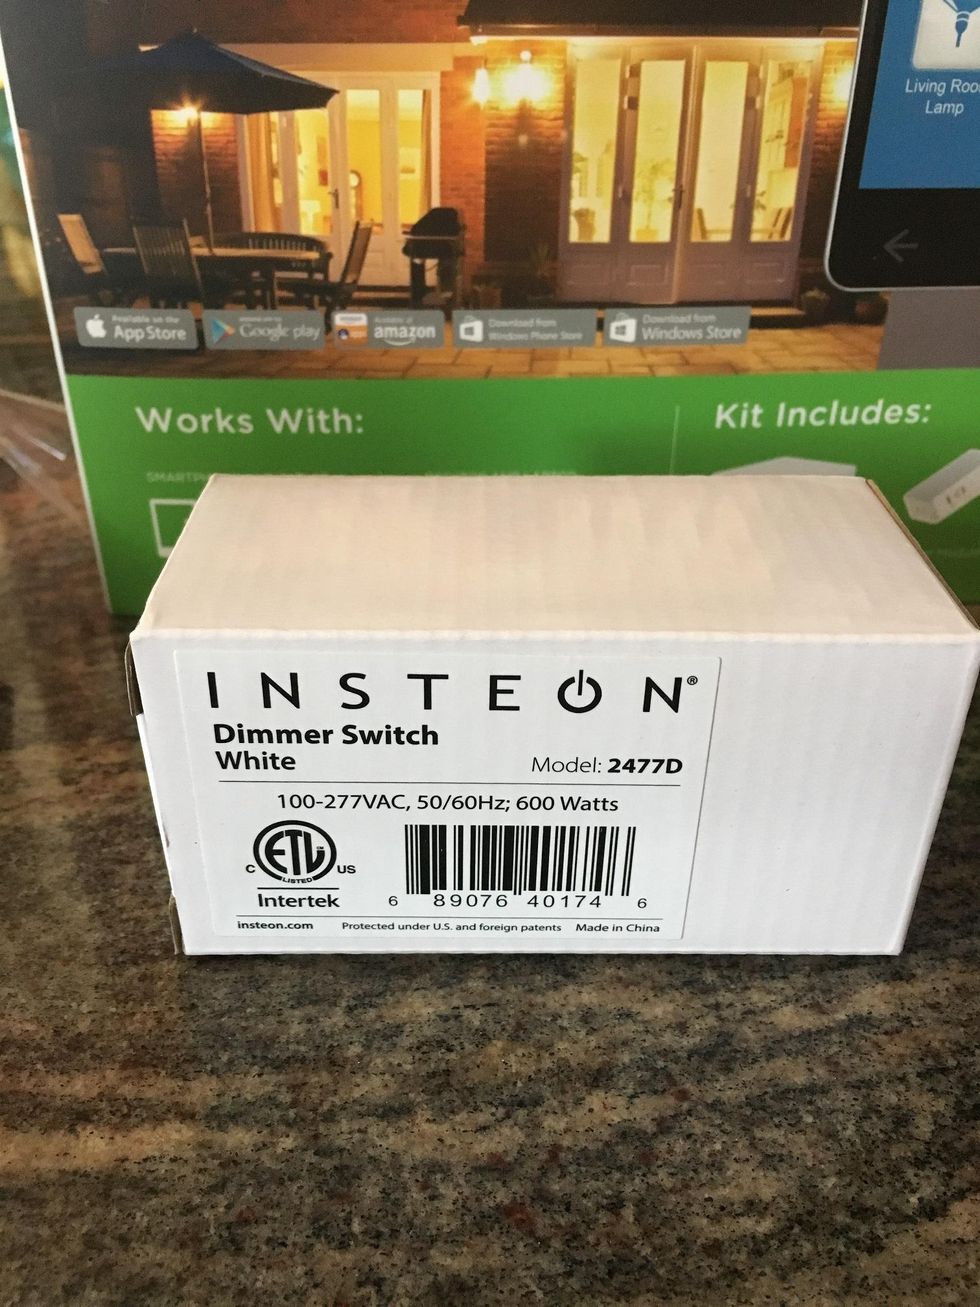 A photo of Insteon Dimmer Switch box on a countertop